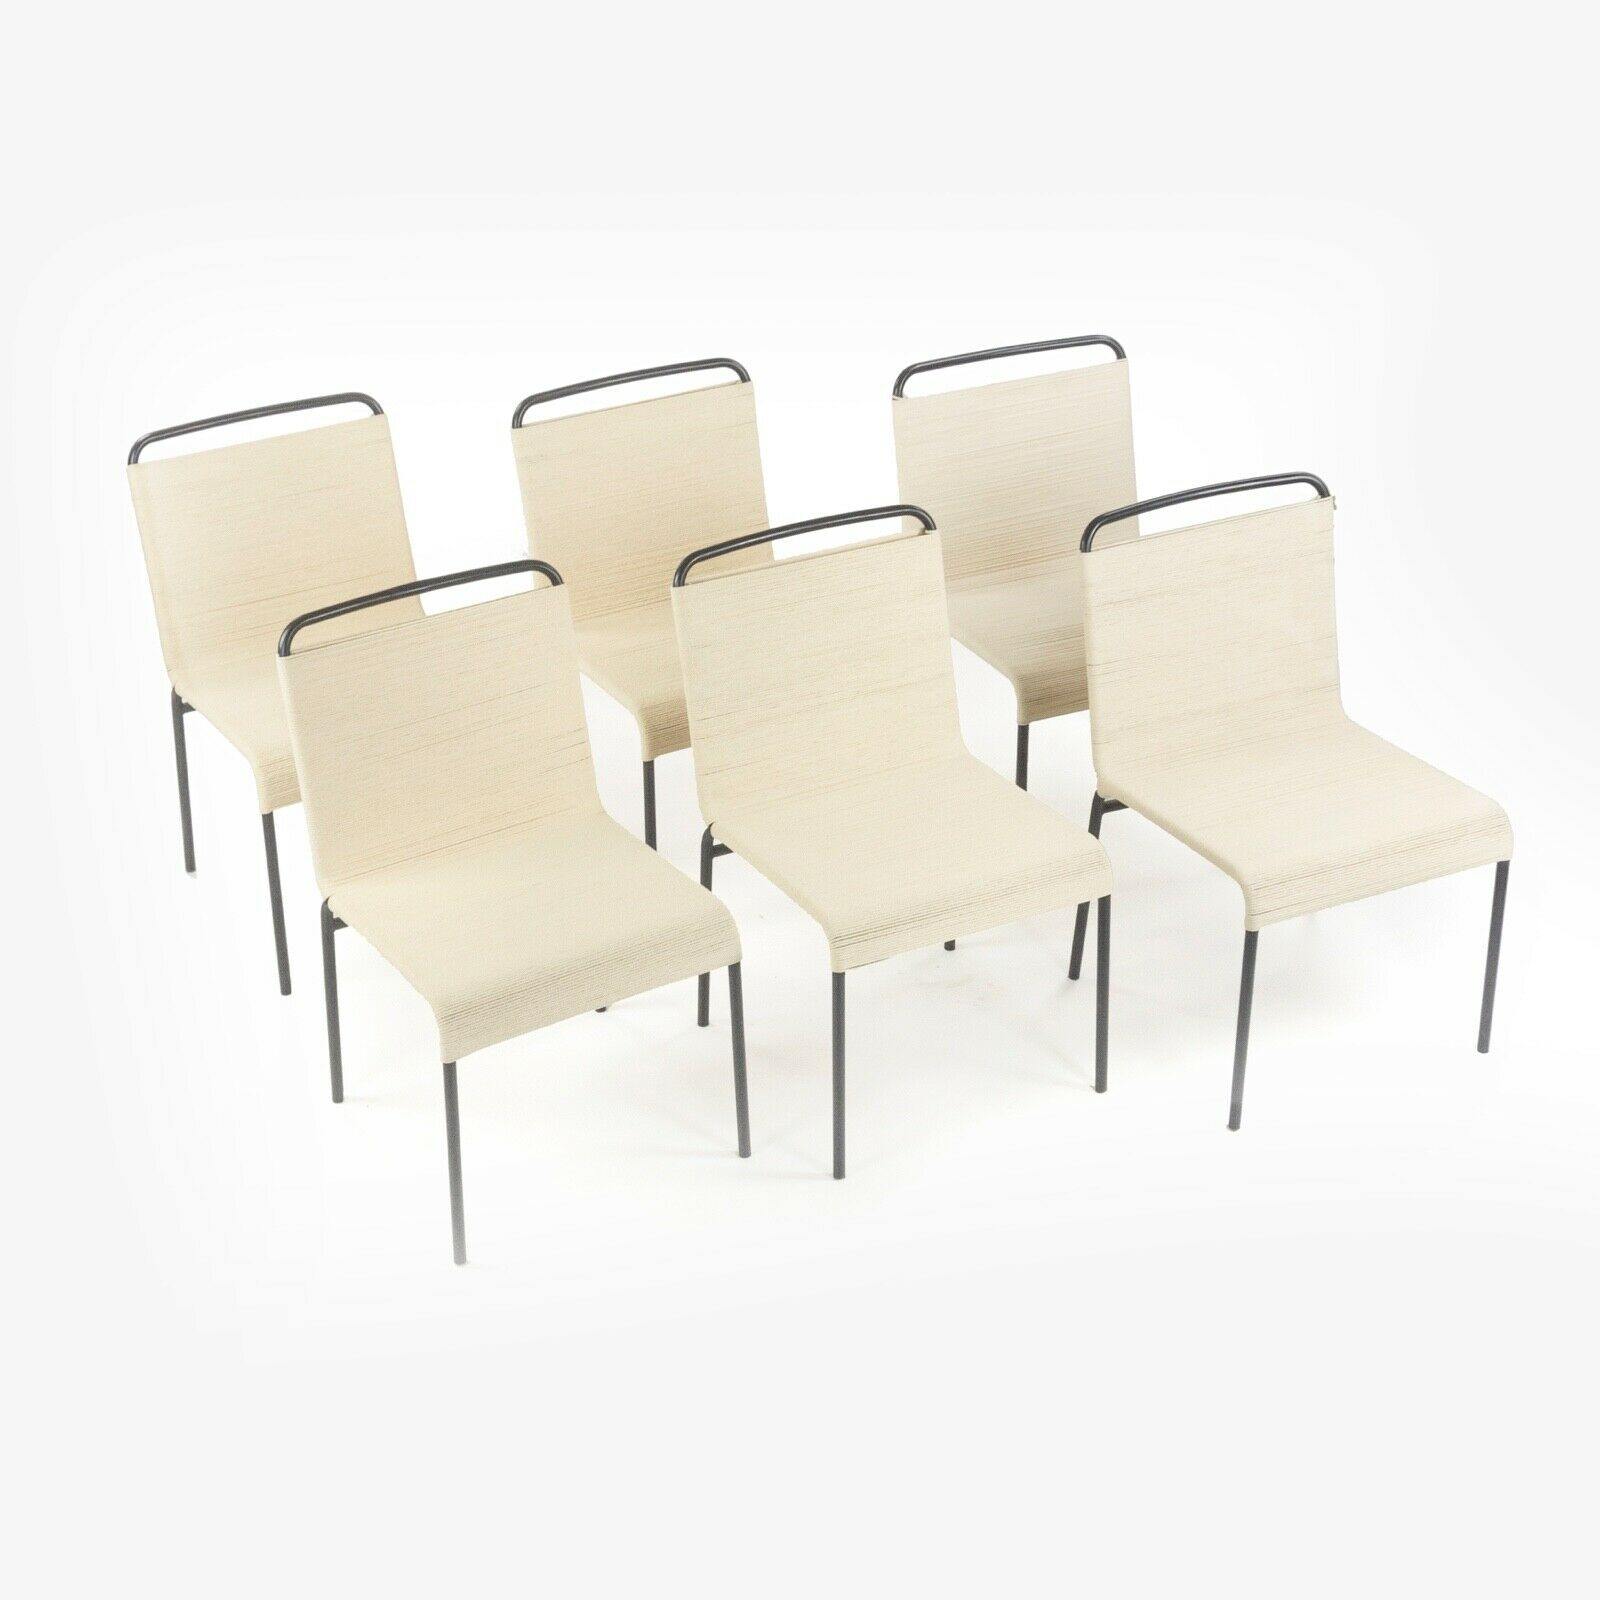 Model 805 Chairs